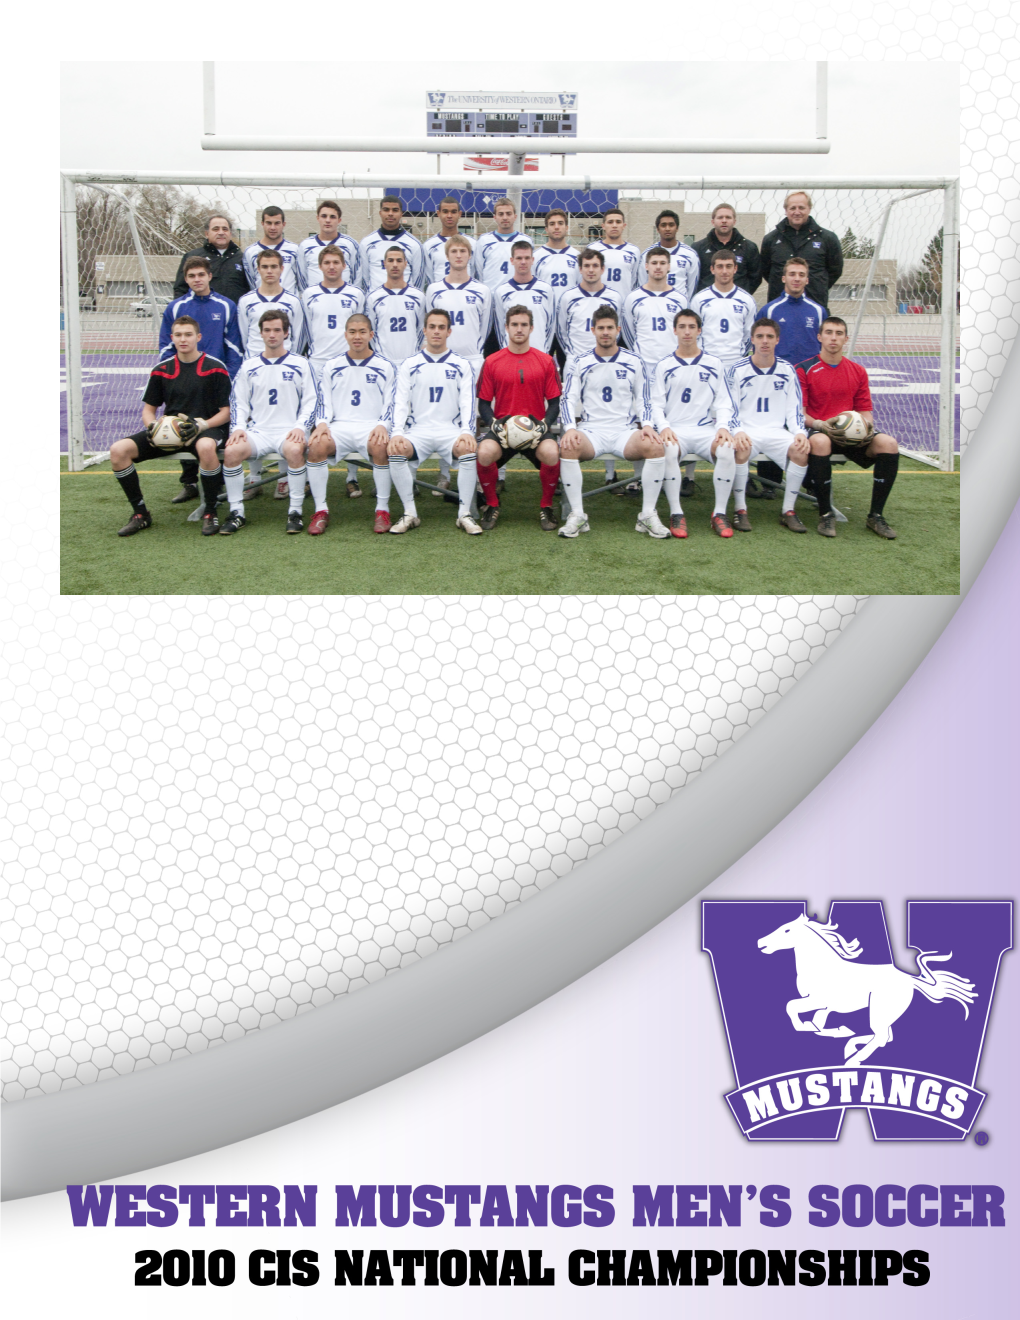 WESTERN MUSTANGS MEN's SOCCER 2010-11 Recruiting And